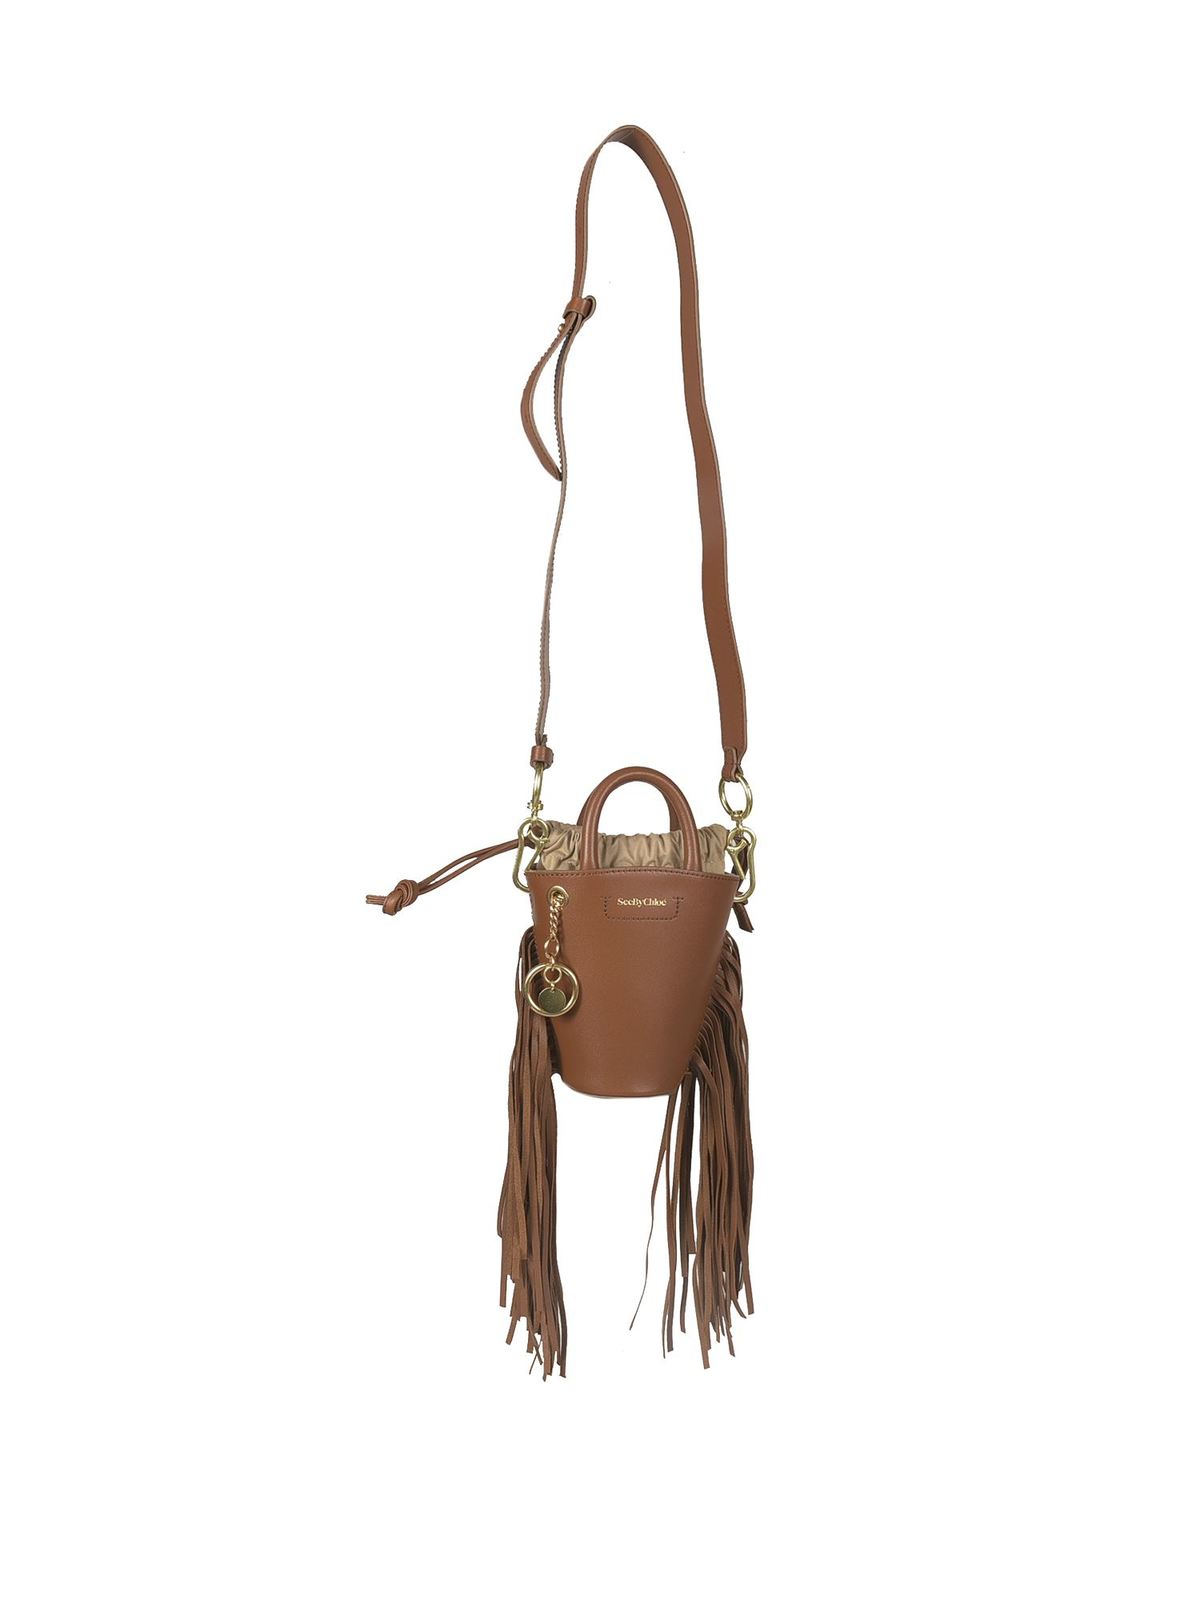 SEE BY CHLOÉ FRINGED MINI CECILYA BAG IN CARAMELLO colour